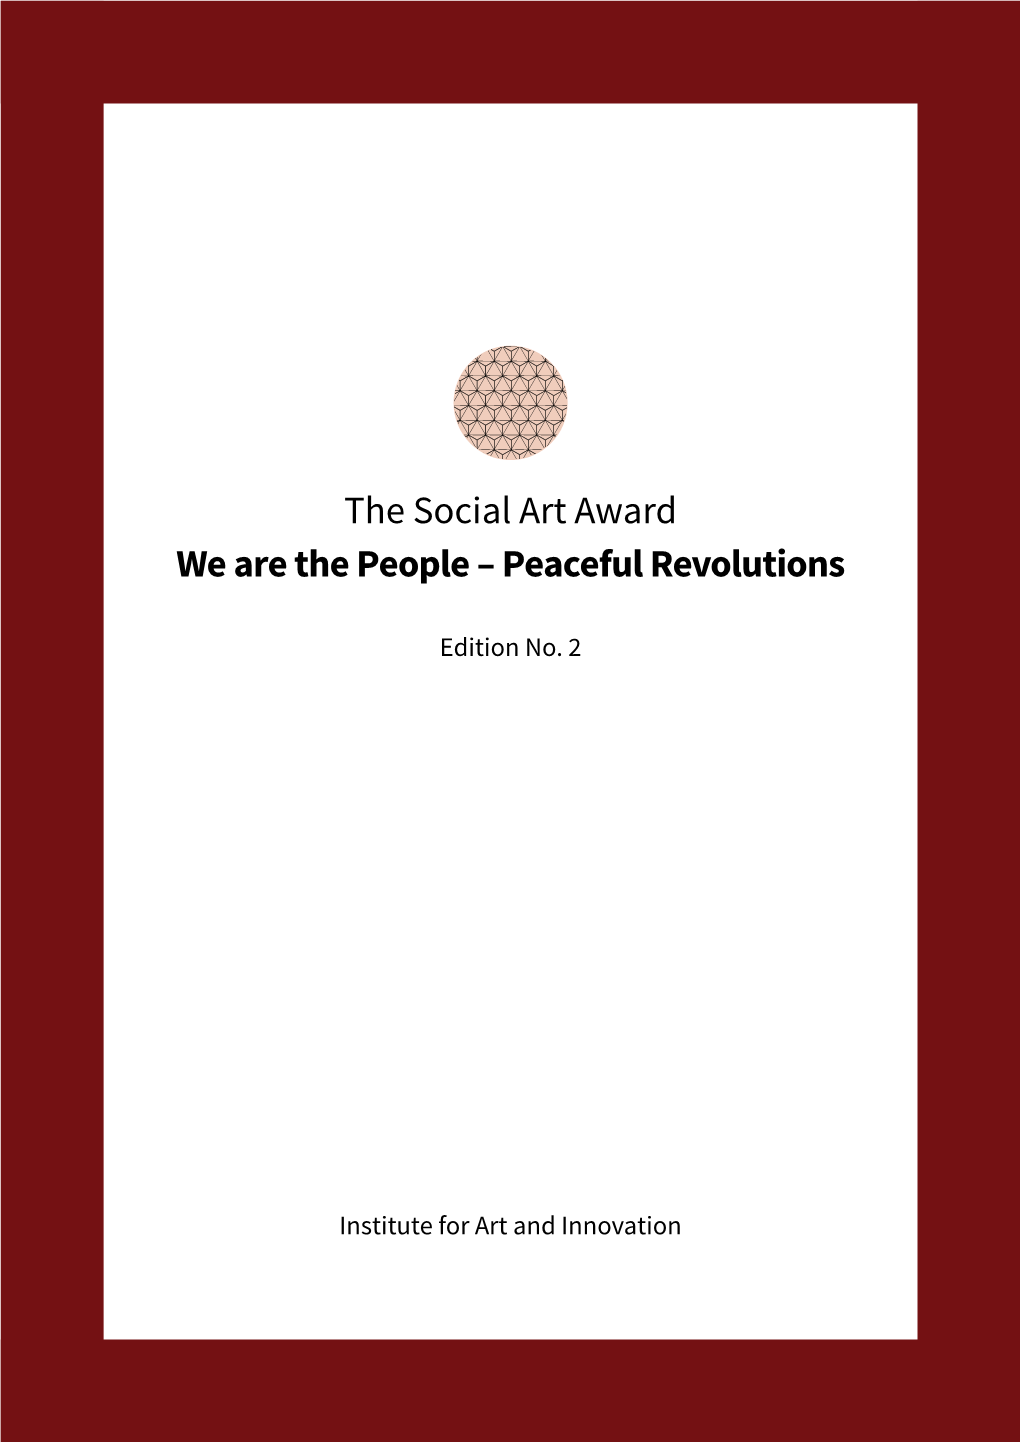 The Social Art Award 2019 We Are the People – Peaceful Revolutions